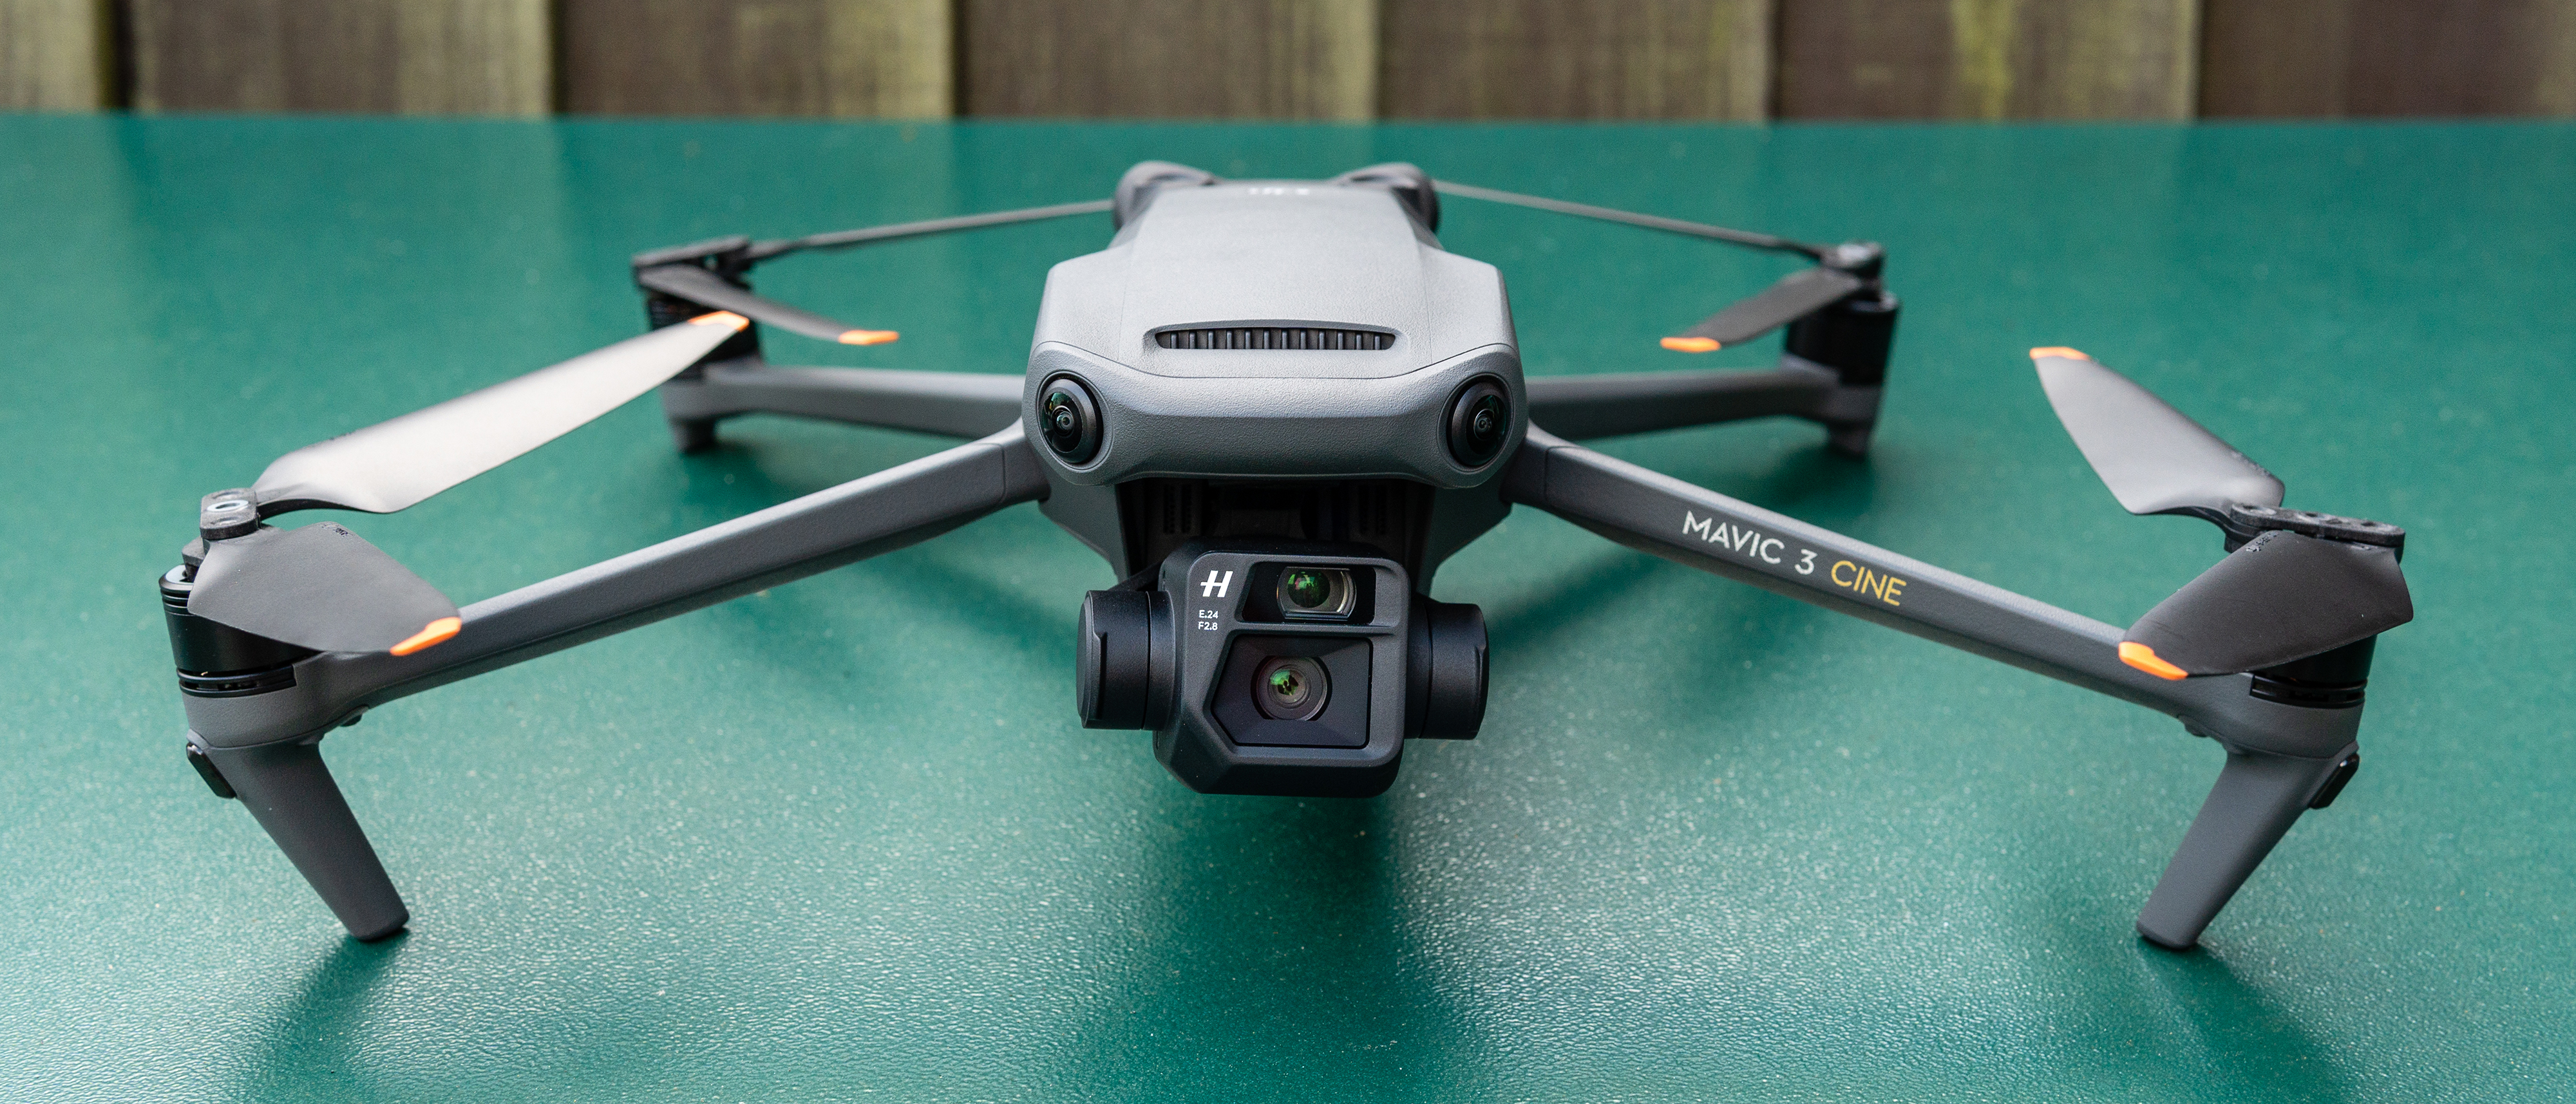 DJI Mavic 3 and Mavic 3 Cine review: a pricey drone that performs